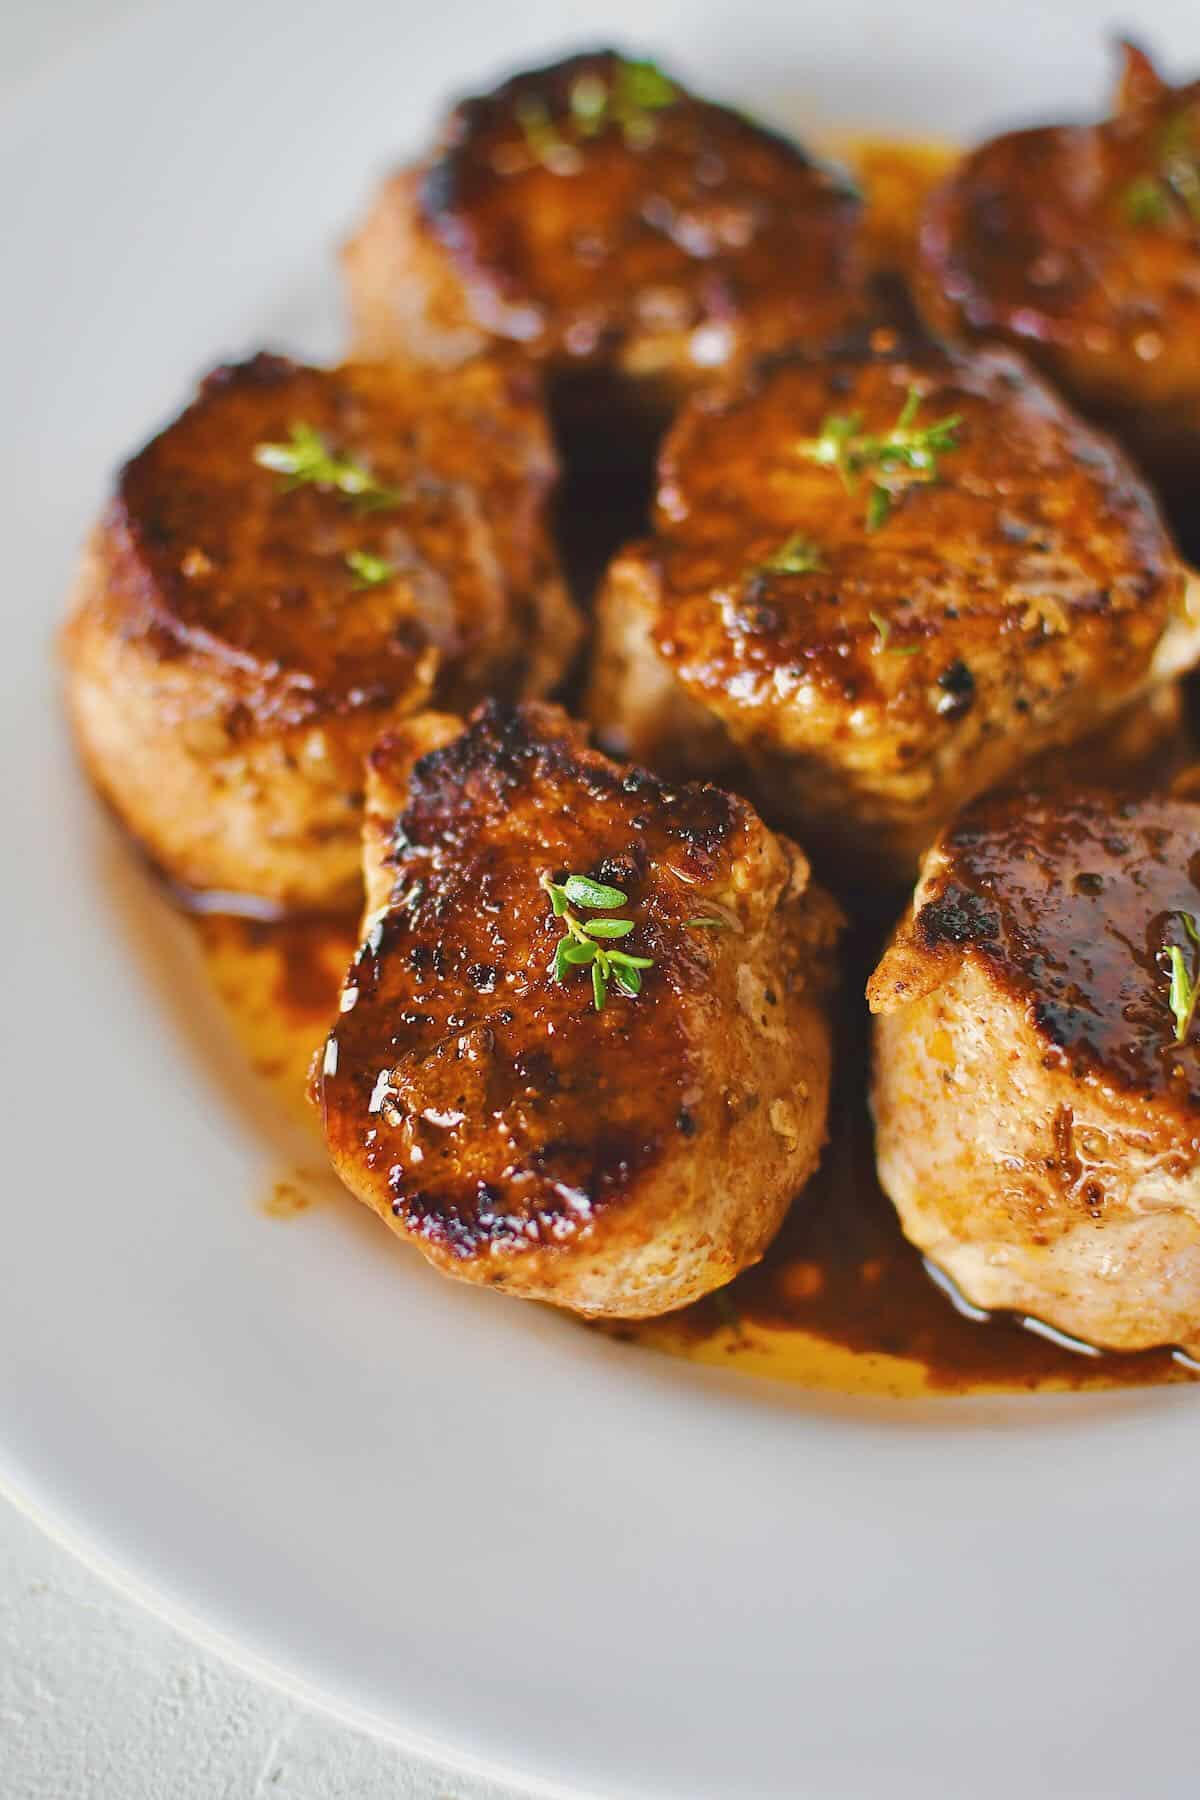 Pork Tenderloin Medallions basted with sauce and resting on a plate ready to eat.